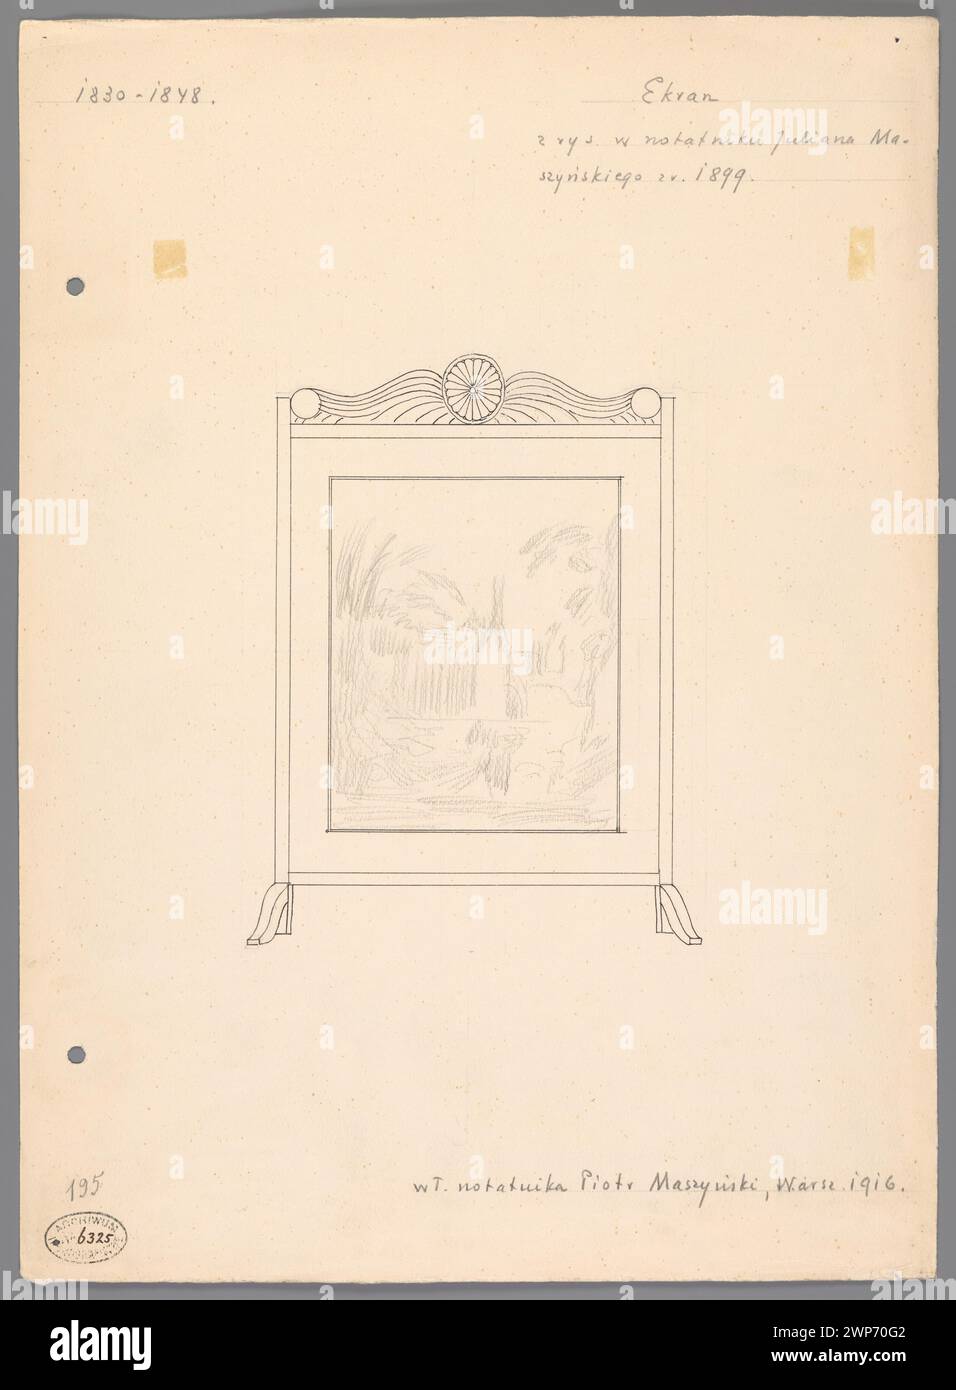 Screen from the 1st of the nineteenth century according to the drawing in the notebook of Julian Machy from 1899, from the collection of Piotr Maszy in Warsaw in 1916; Masha, Mariusz (1888-1944); 1916 (not after 9.05.1916) (1916-00-00-1916-00-00); Stock Photo